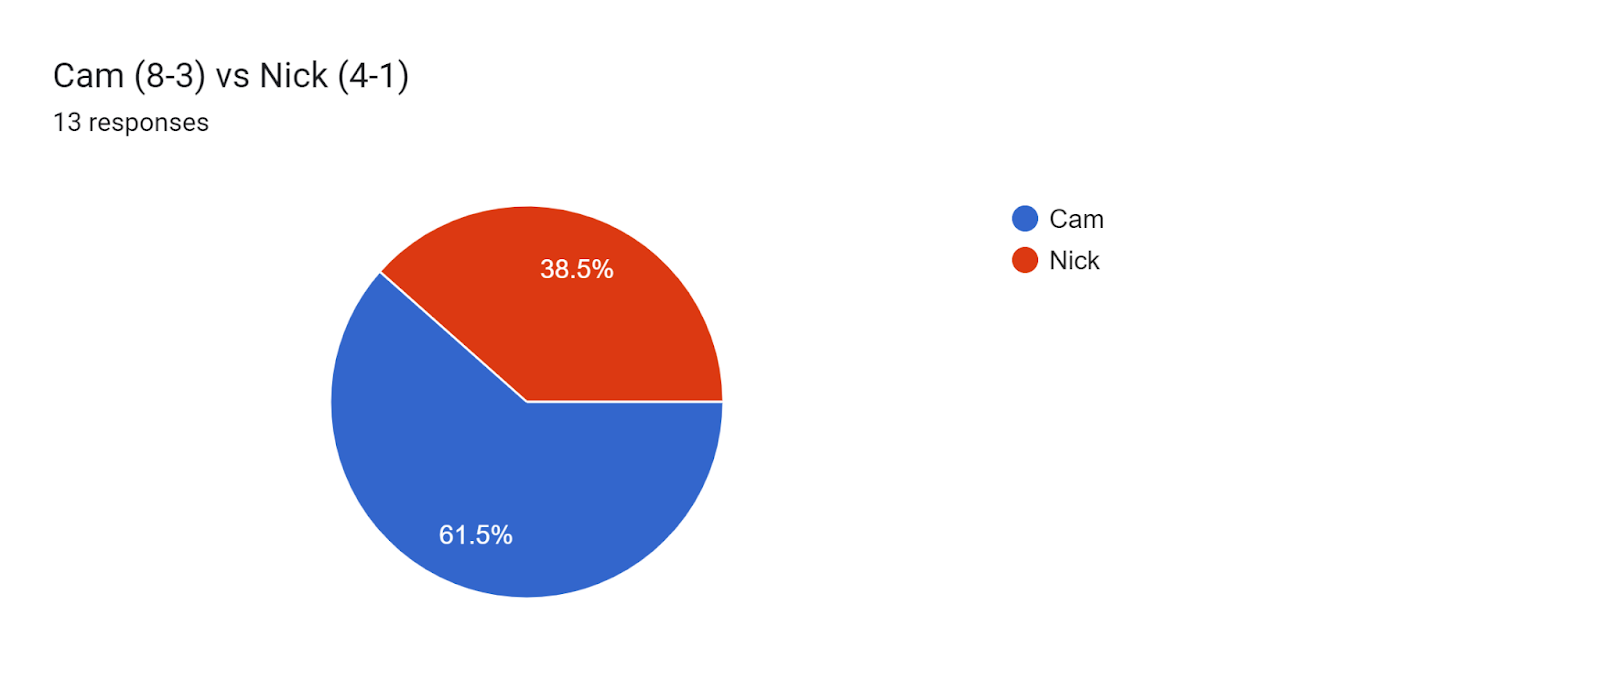 Forms response chart. Question title: Cam (8-3) vs Nick (4-1). Number of responses: 13 responses.